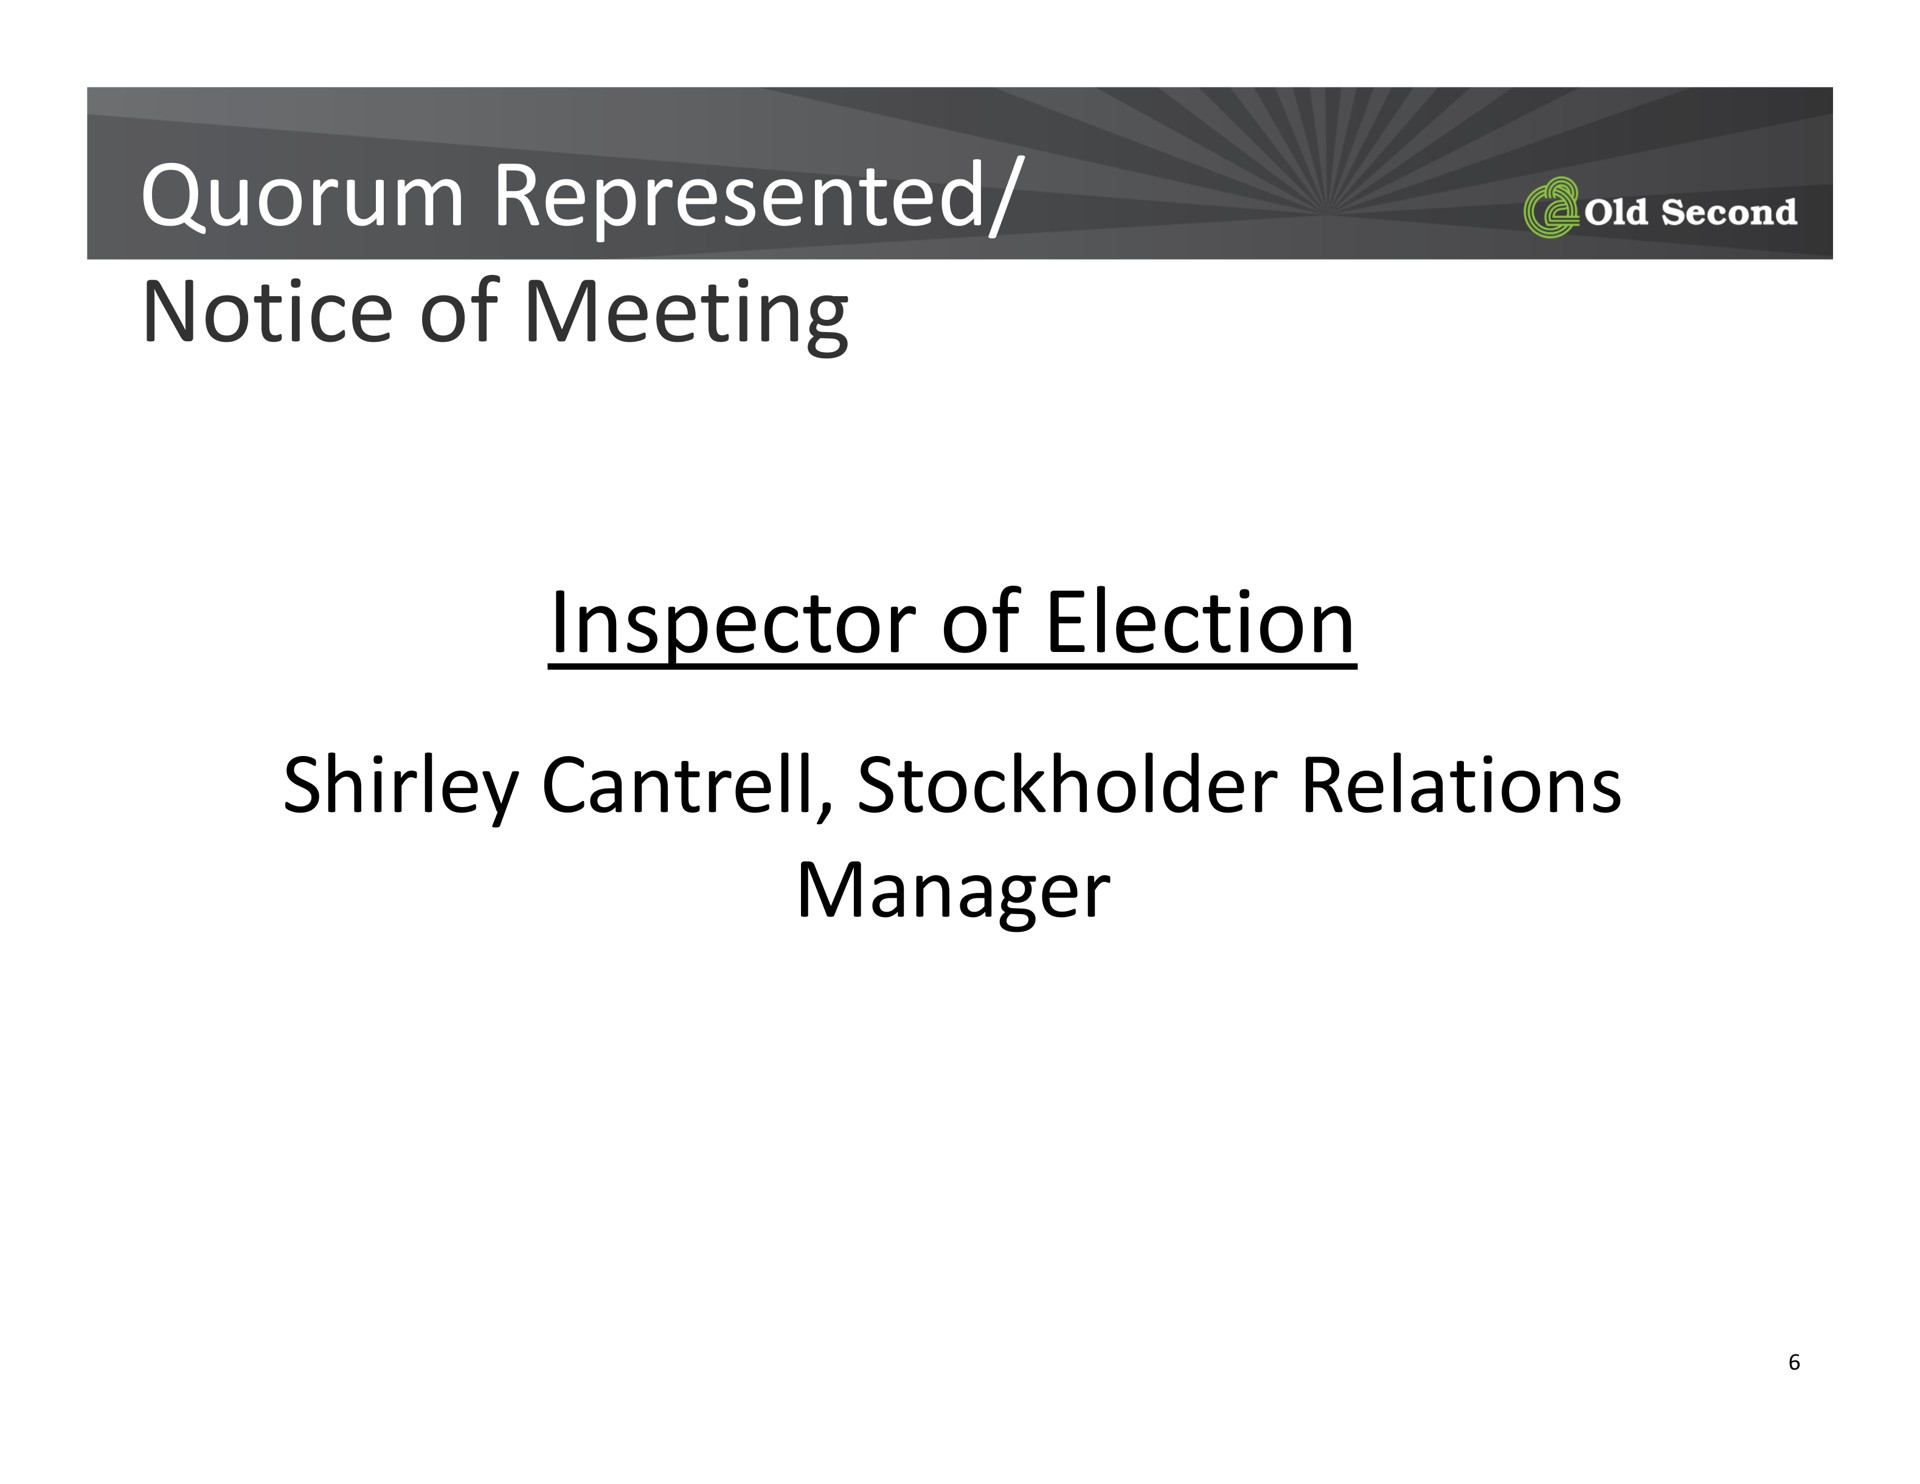 quorum represented notice of meeting inspector of election stockholder relations manager cee | Old Second Bancorp